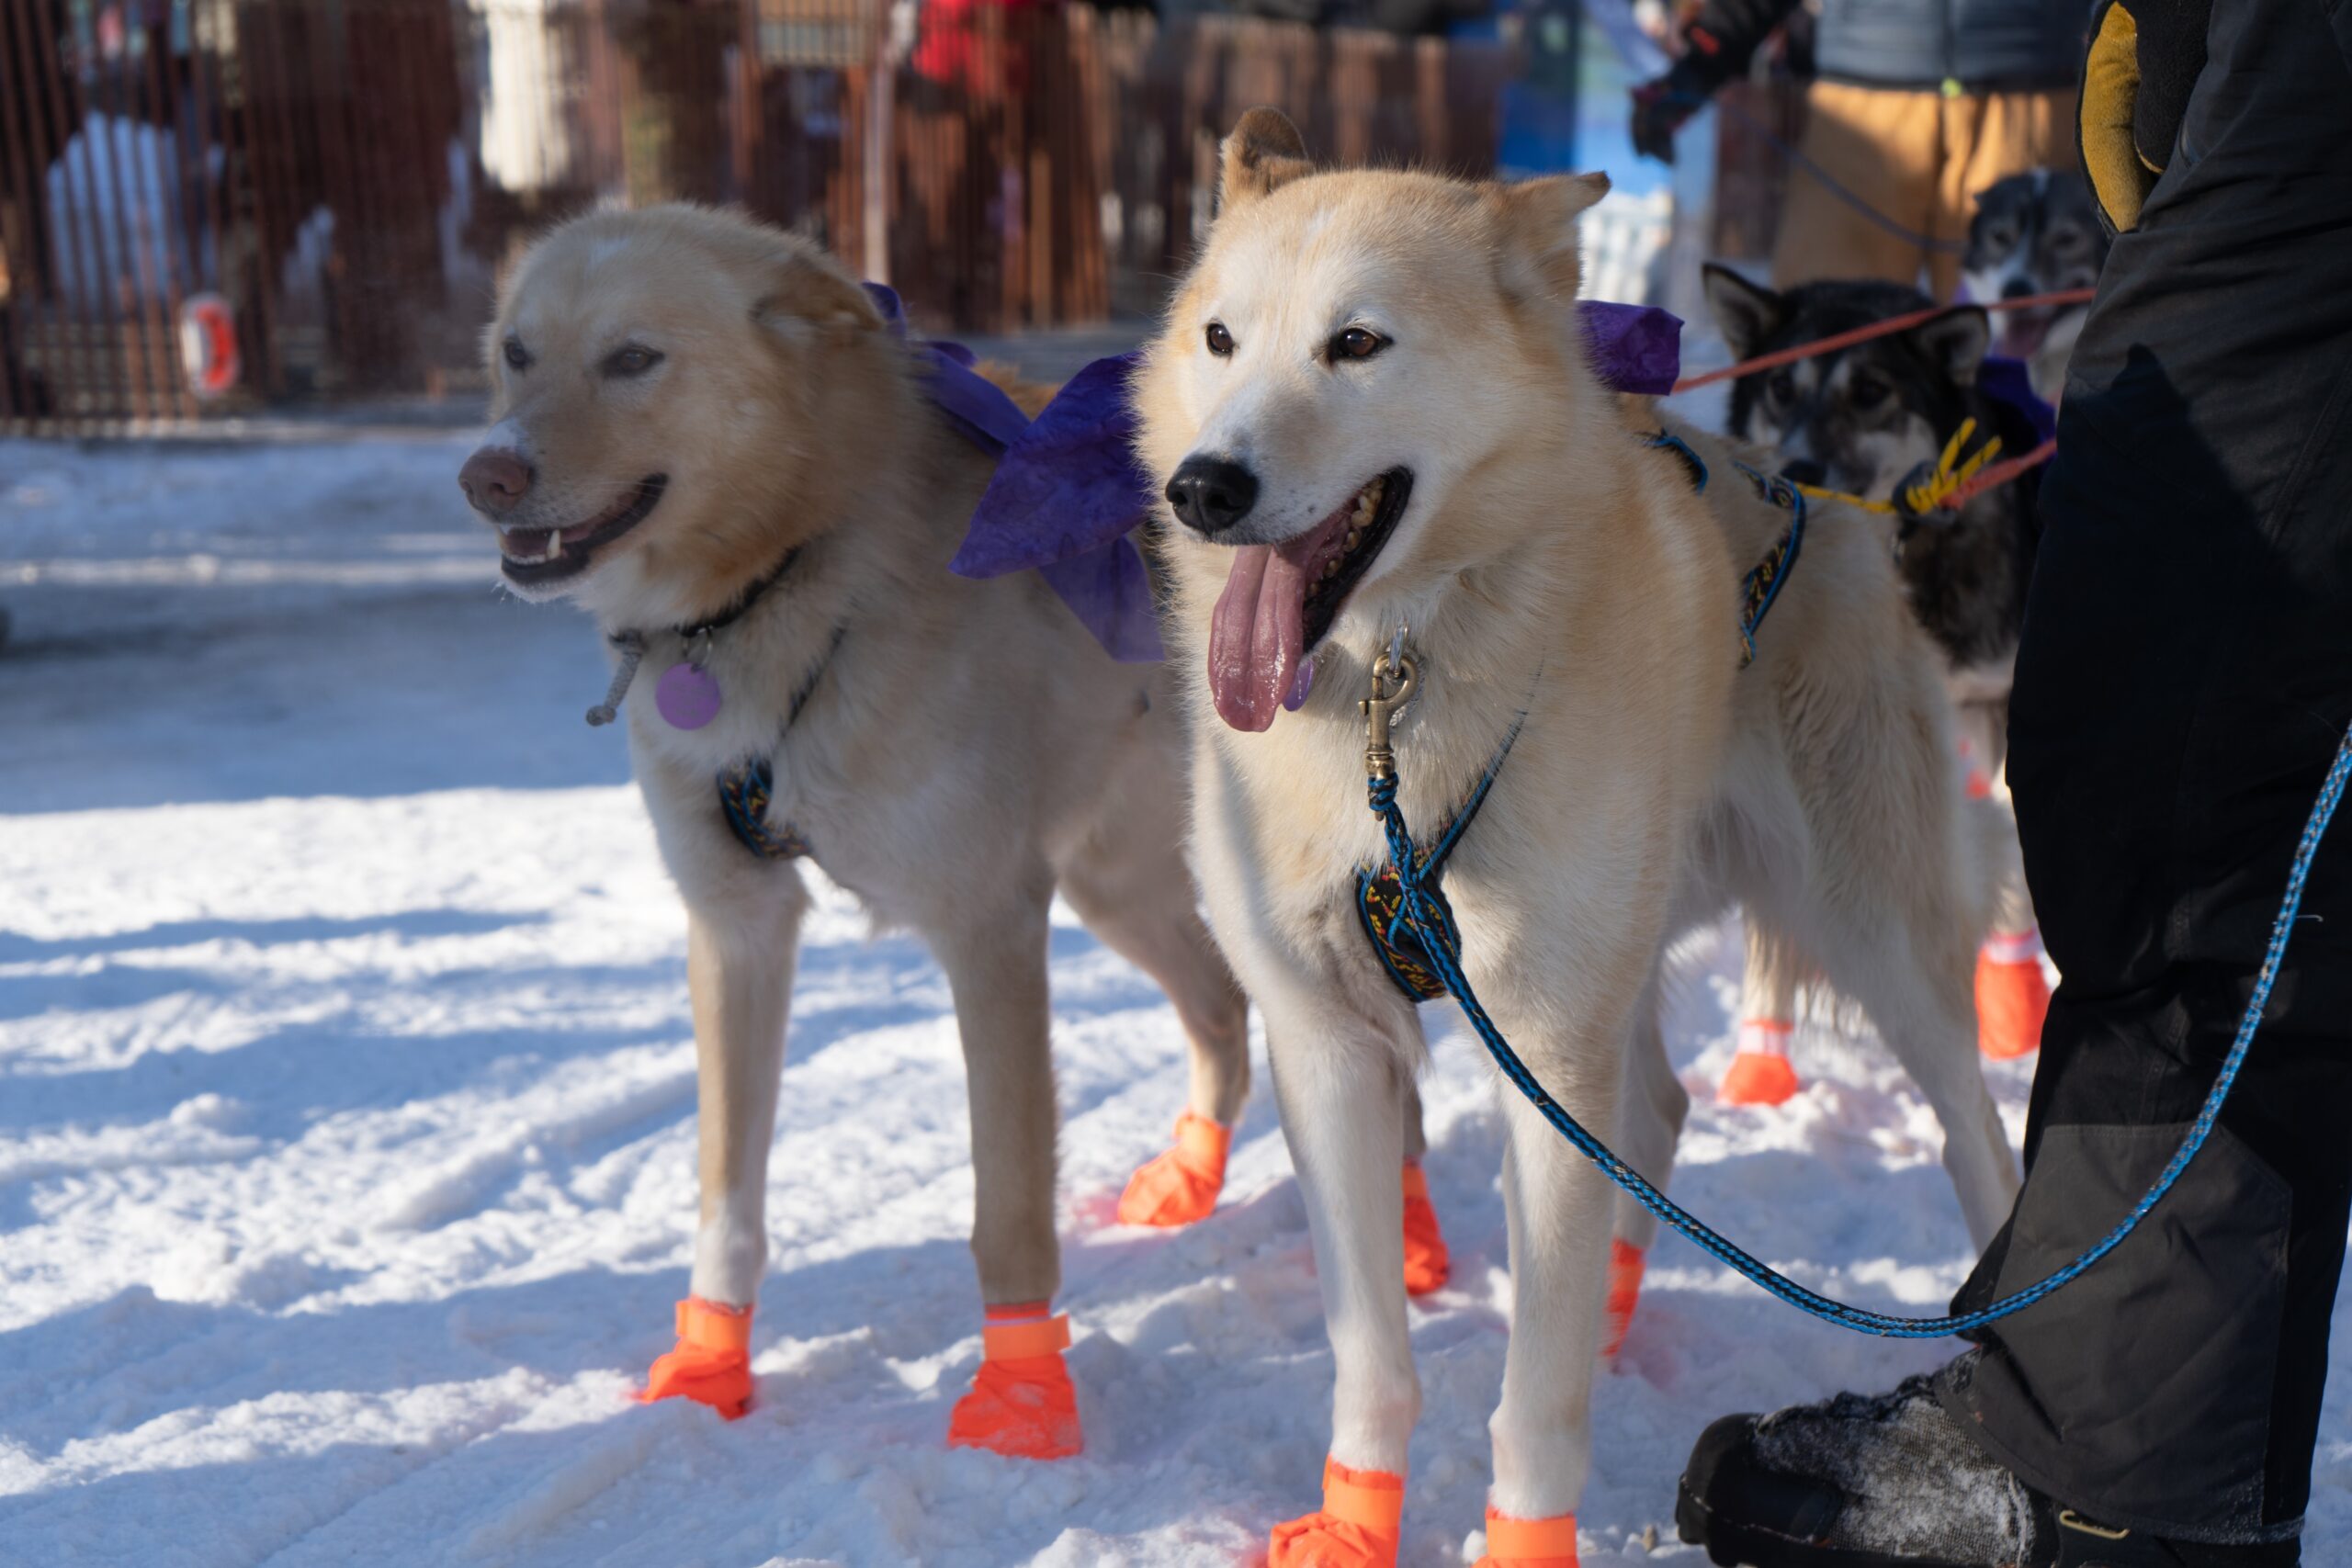 Two yellow lead dogs in bright pink booties